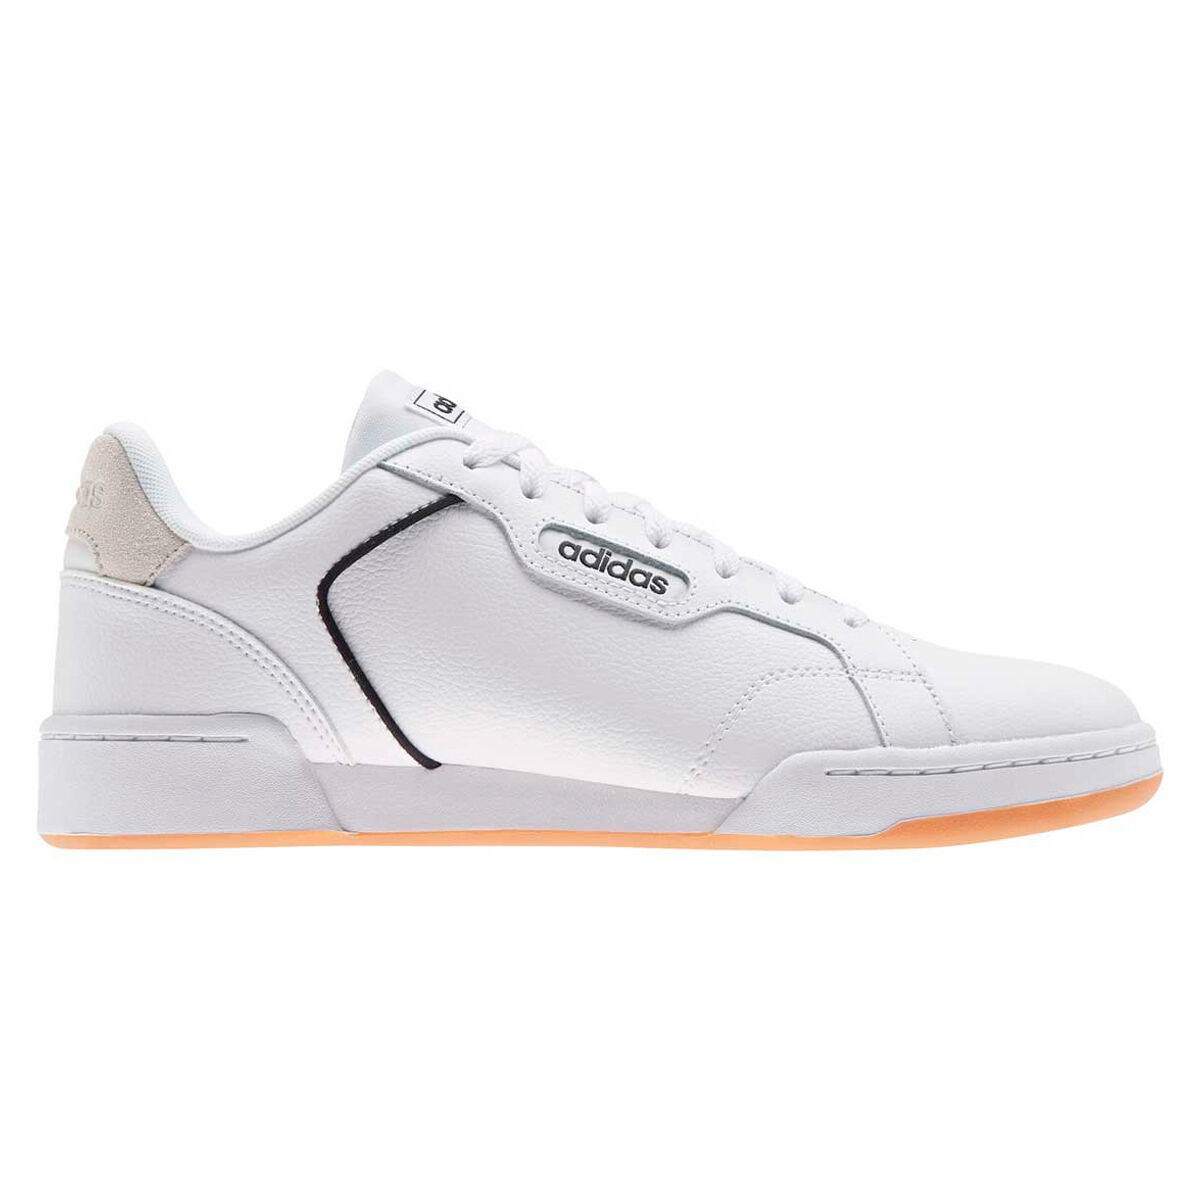 mens casual sneakers white